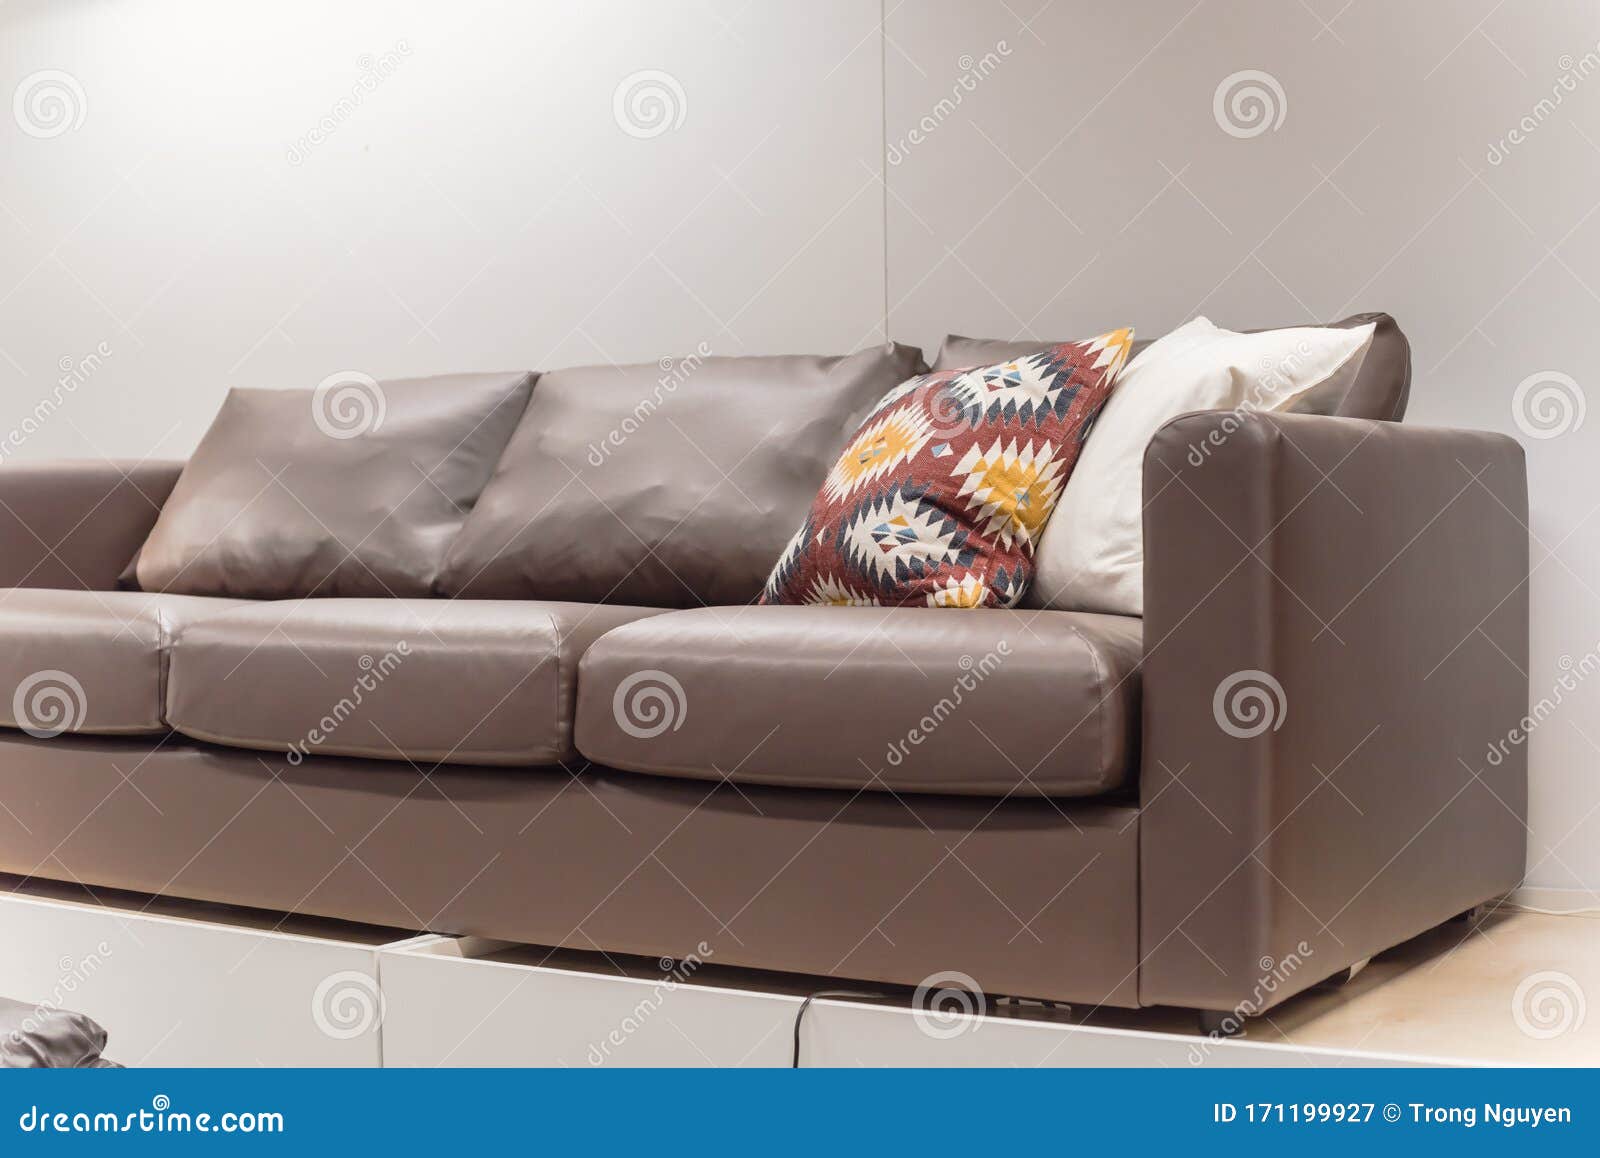 Leather Sofas And Couches At Furniture And Home Furnishing Store